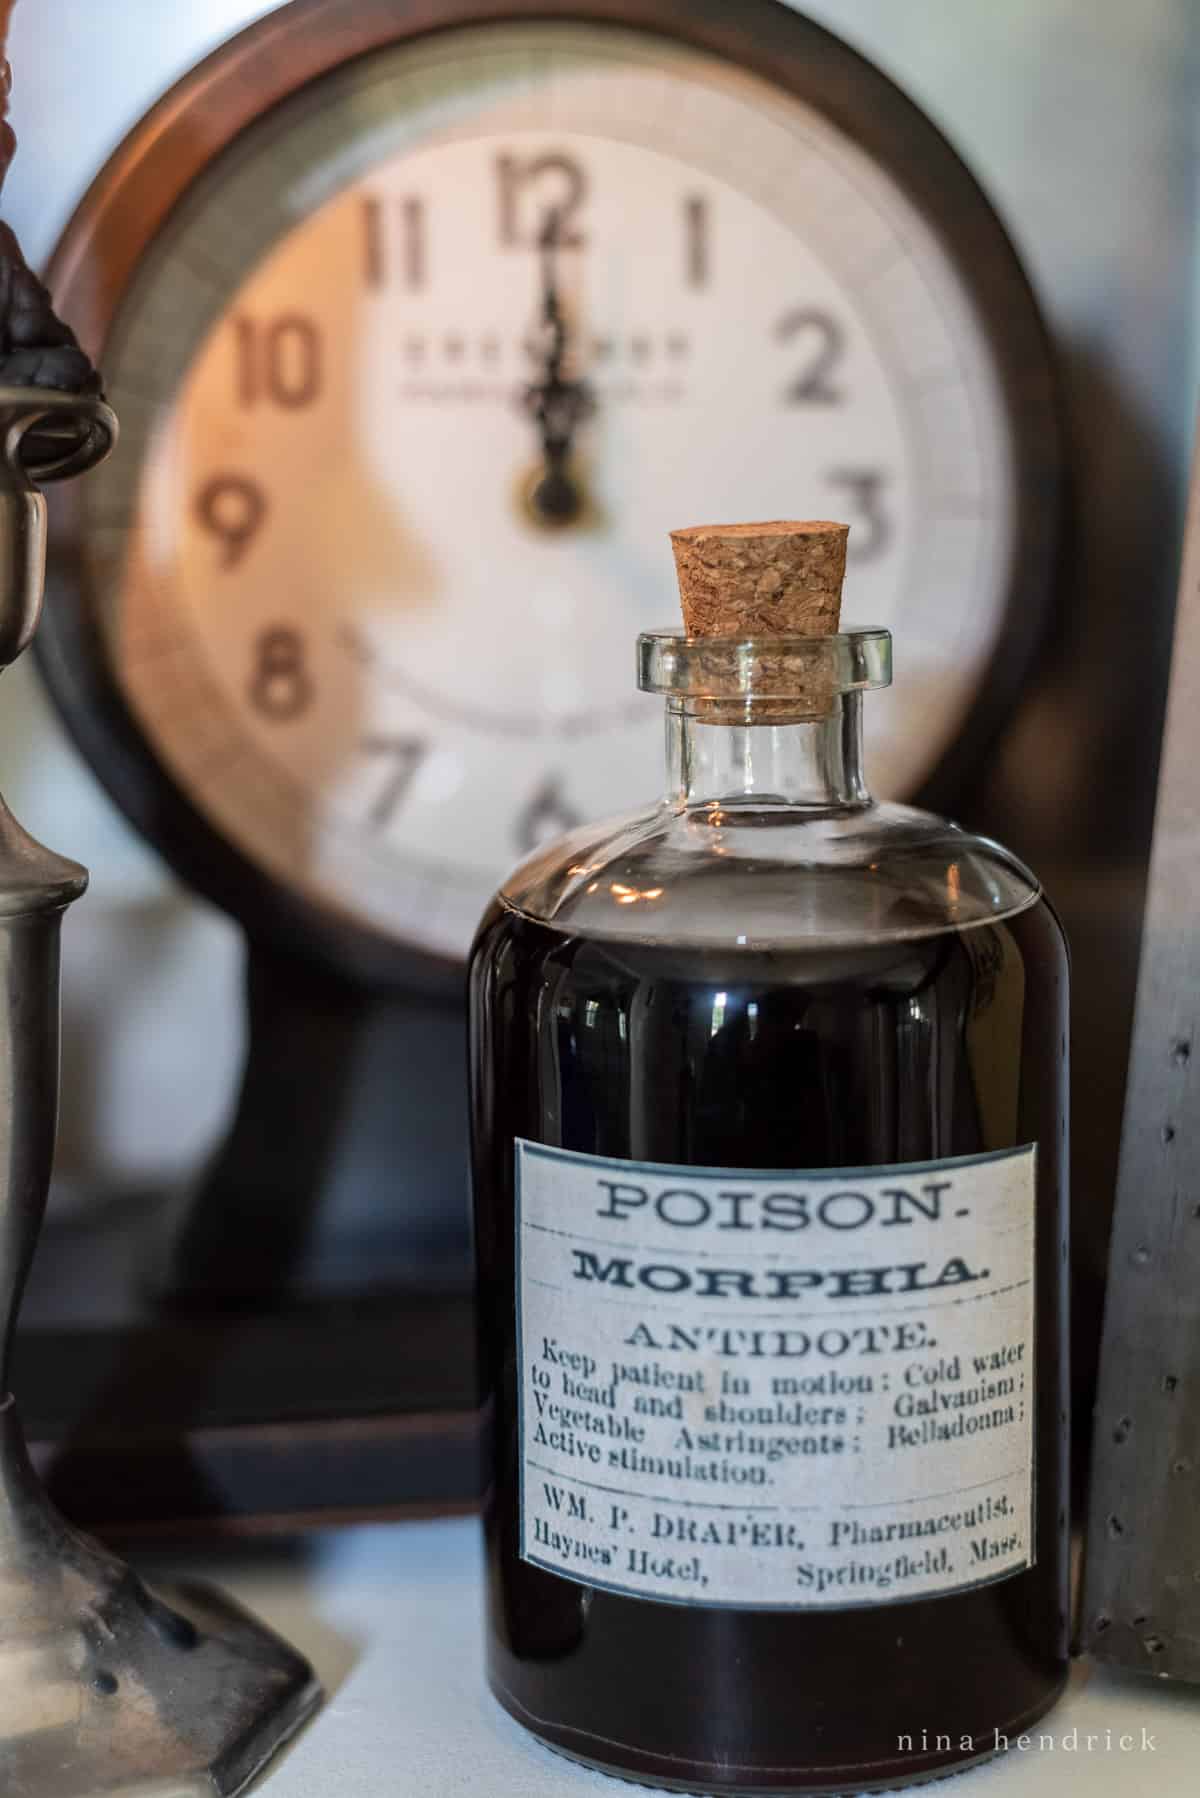 A bottle of faux poison is sitting on a table next to a clock.